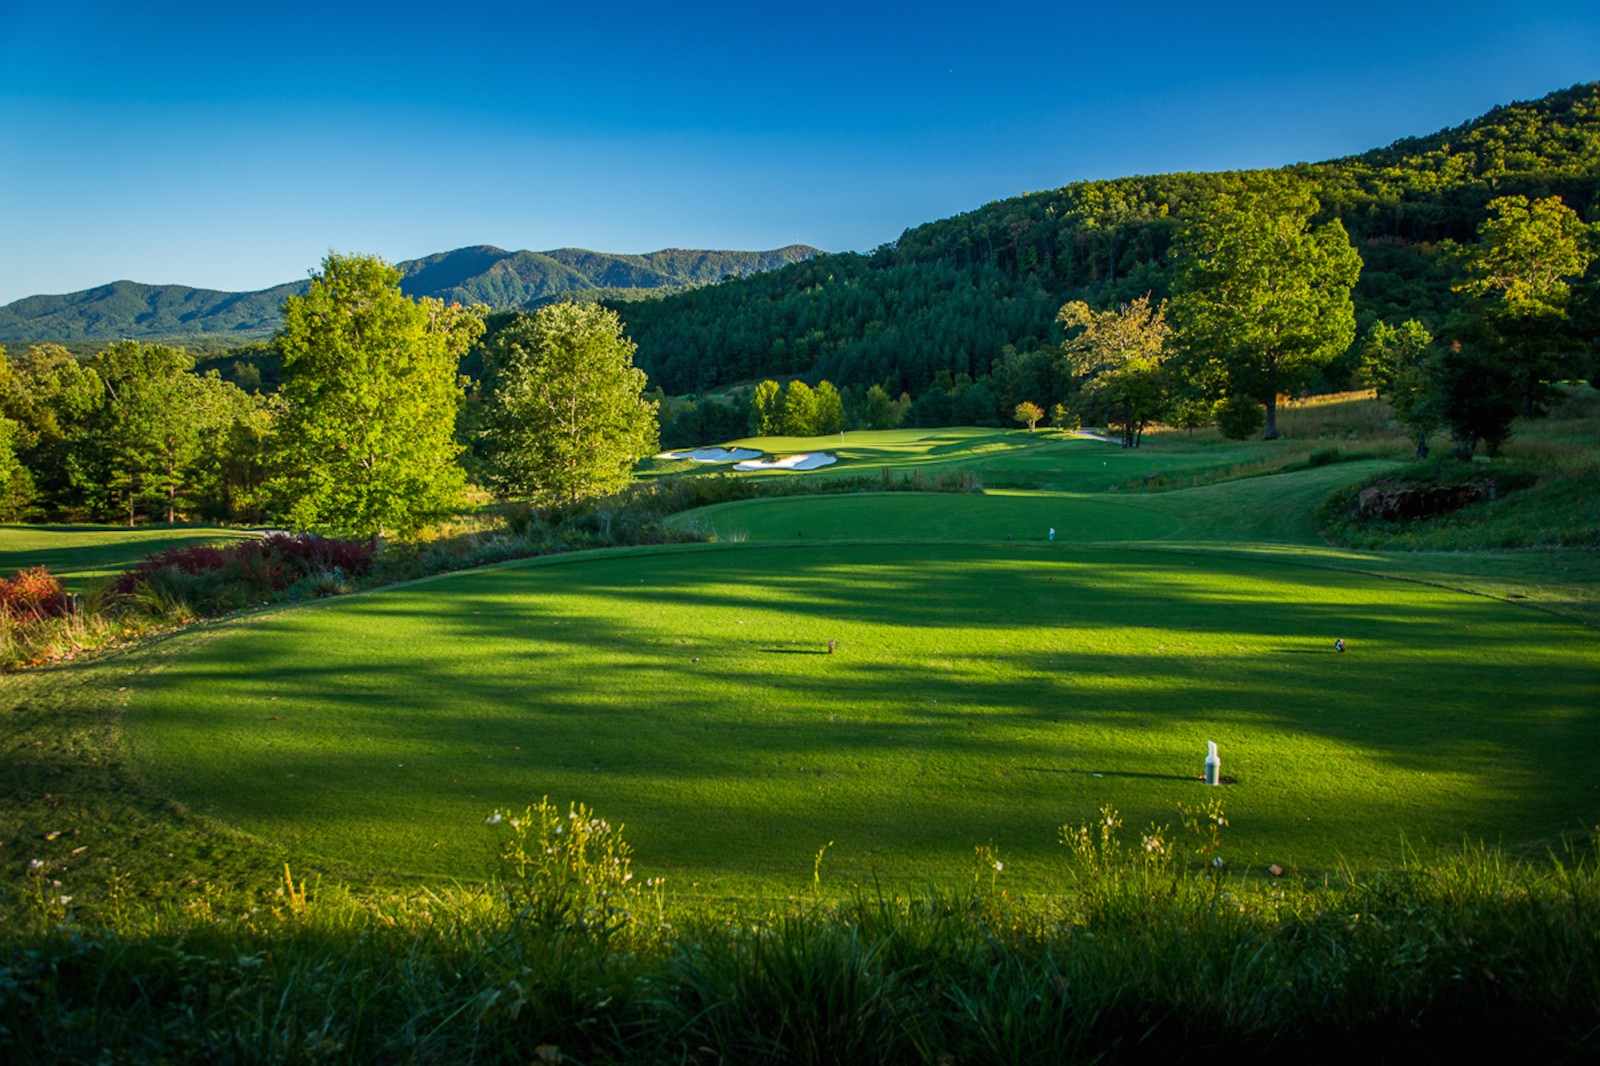 Bright's Creek Golf Club in Mill Spring, North Carolina with views of the Blue Ridge Mountains